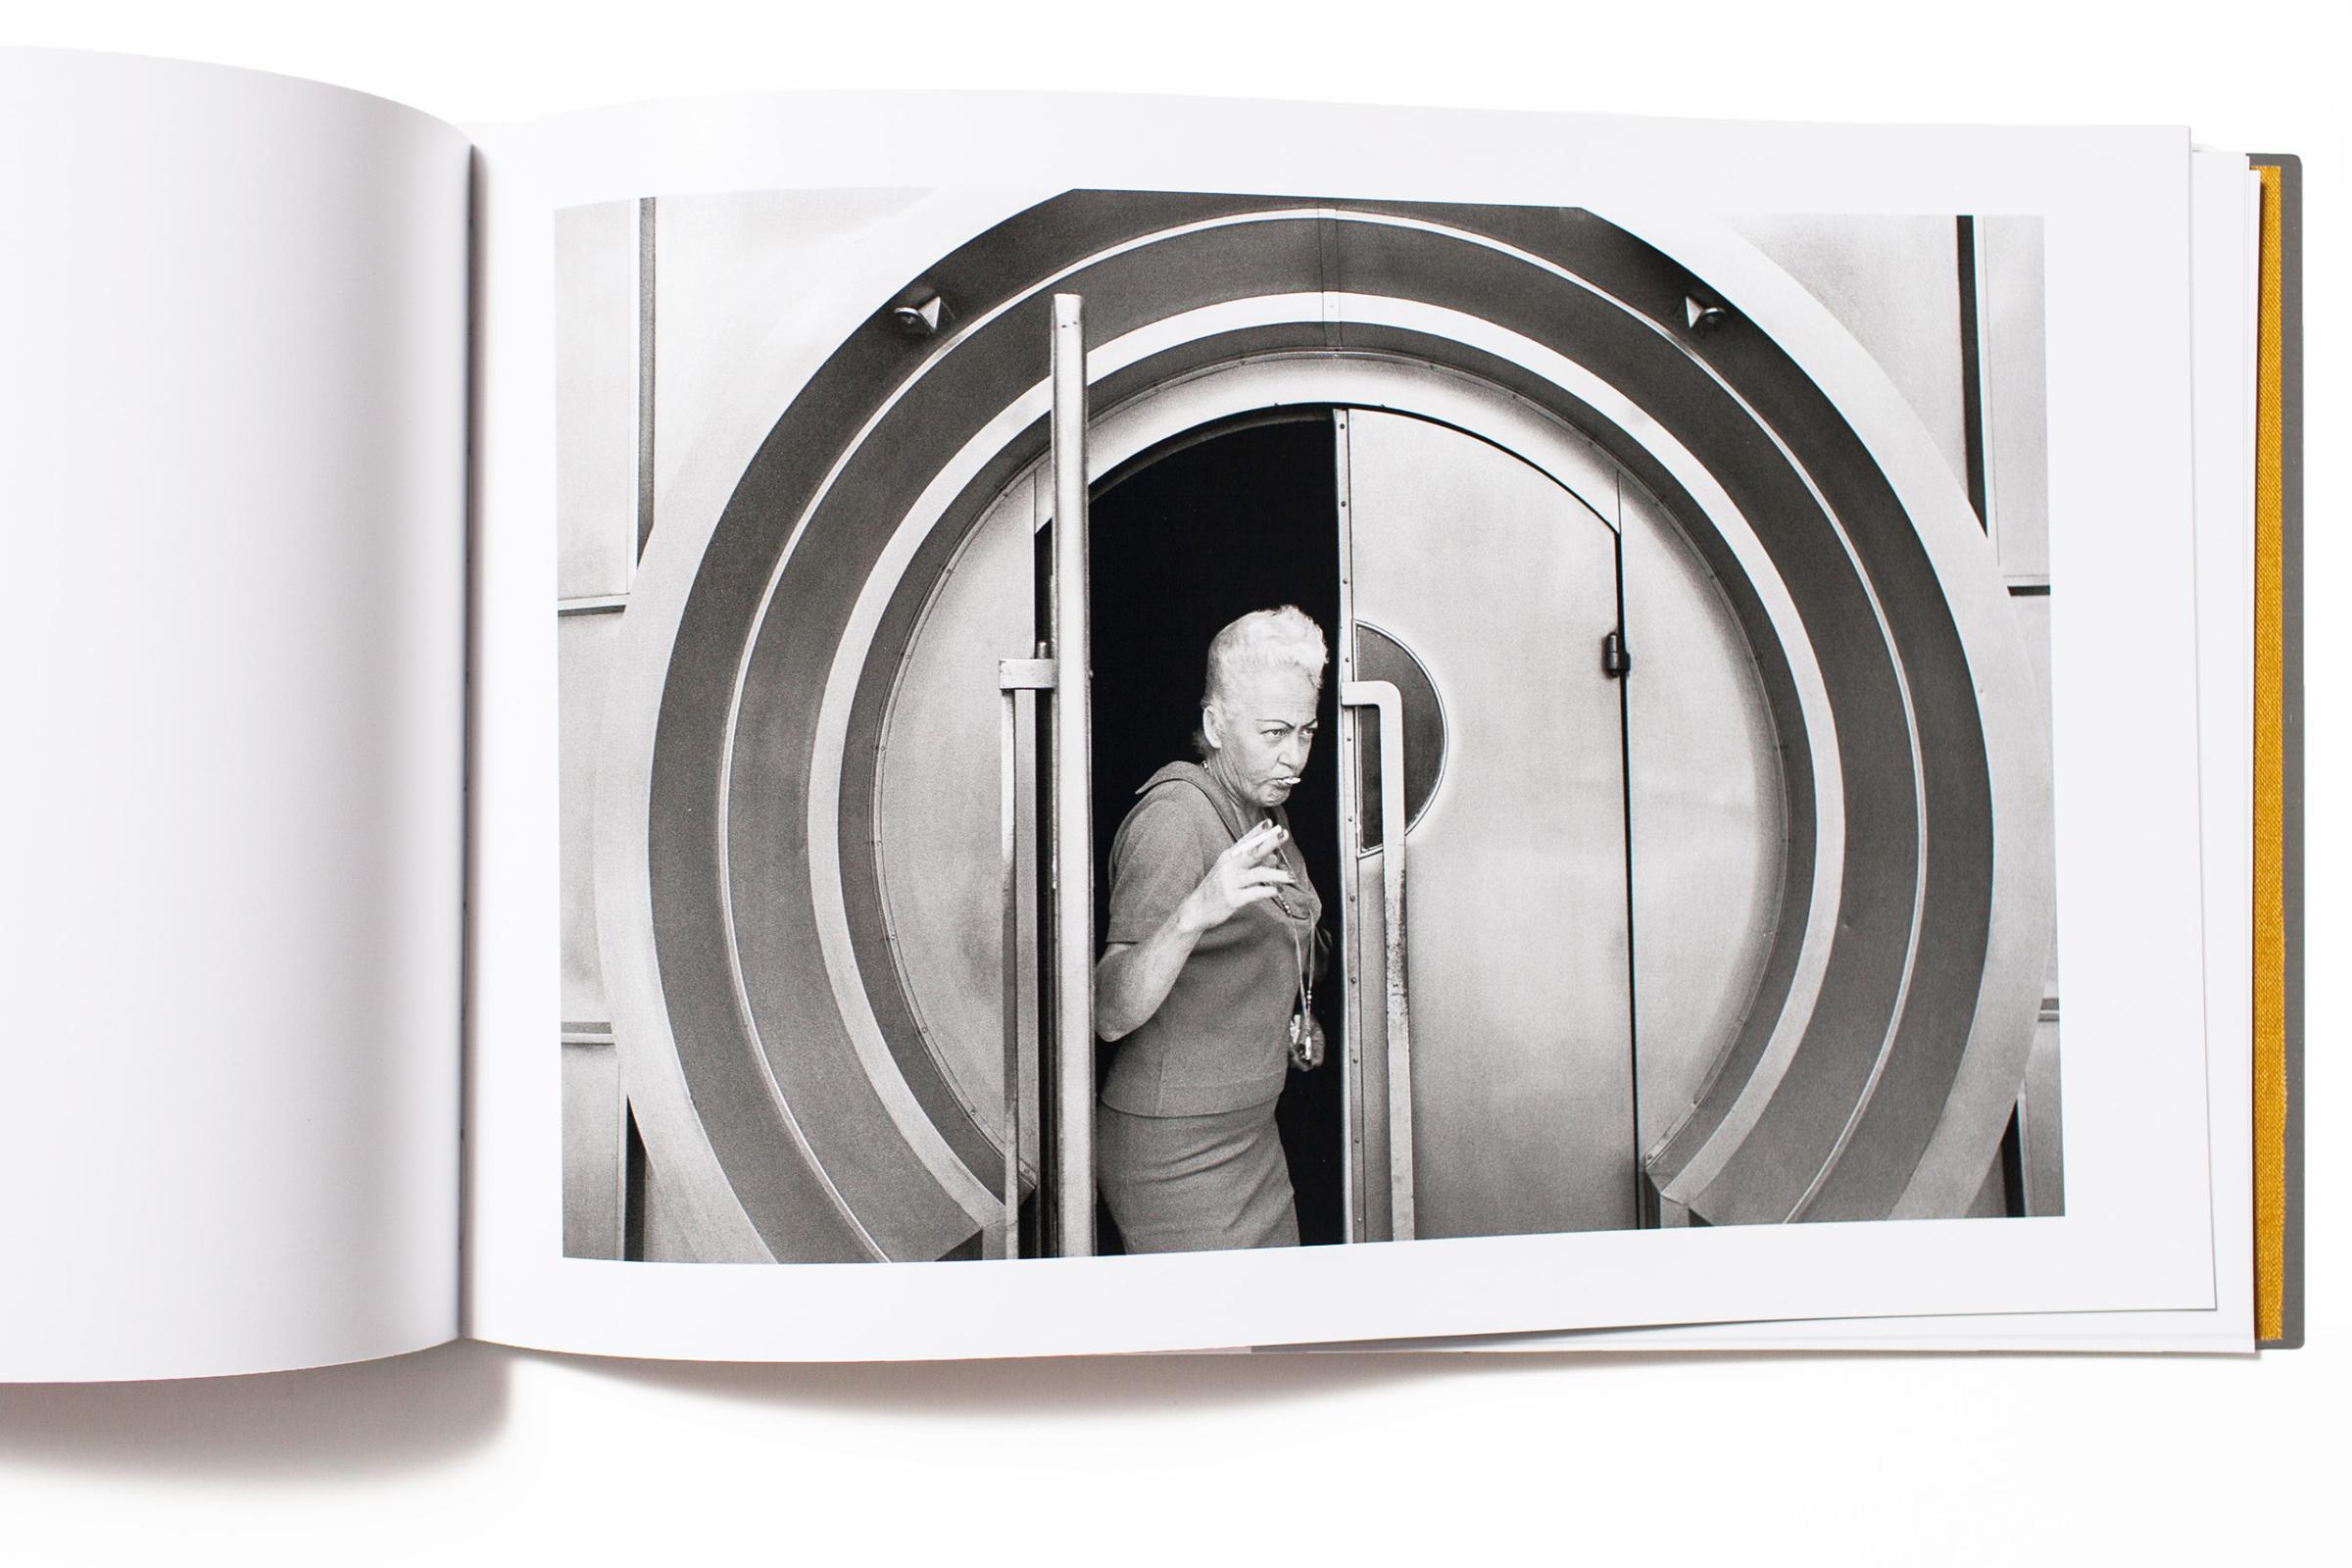 "How can a book comprised of twelve images of something so ordinary as people exiting a door in Los Angeles (that looks oddly at first like a bank vault) captivate interest and validate itself as a book? Anthony HernandezÕs LA, 1971 is a prime example. Is this an early work by the artist inspired and based in conceptualism or simply a string of images that share common elements and form? L.A. 1971 is a surprising and beautiful find from The Silas Finch Foundation."-Jeffery Ladd, photographer, writer and publisher of Errata Editions